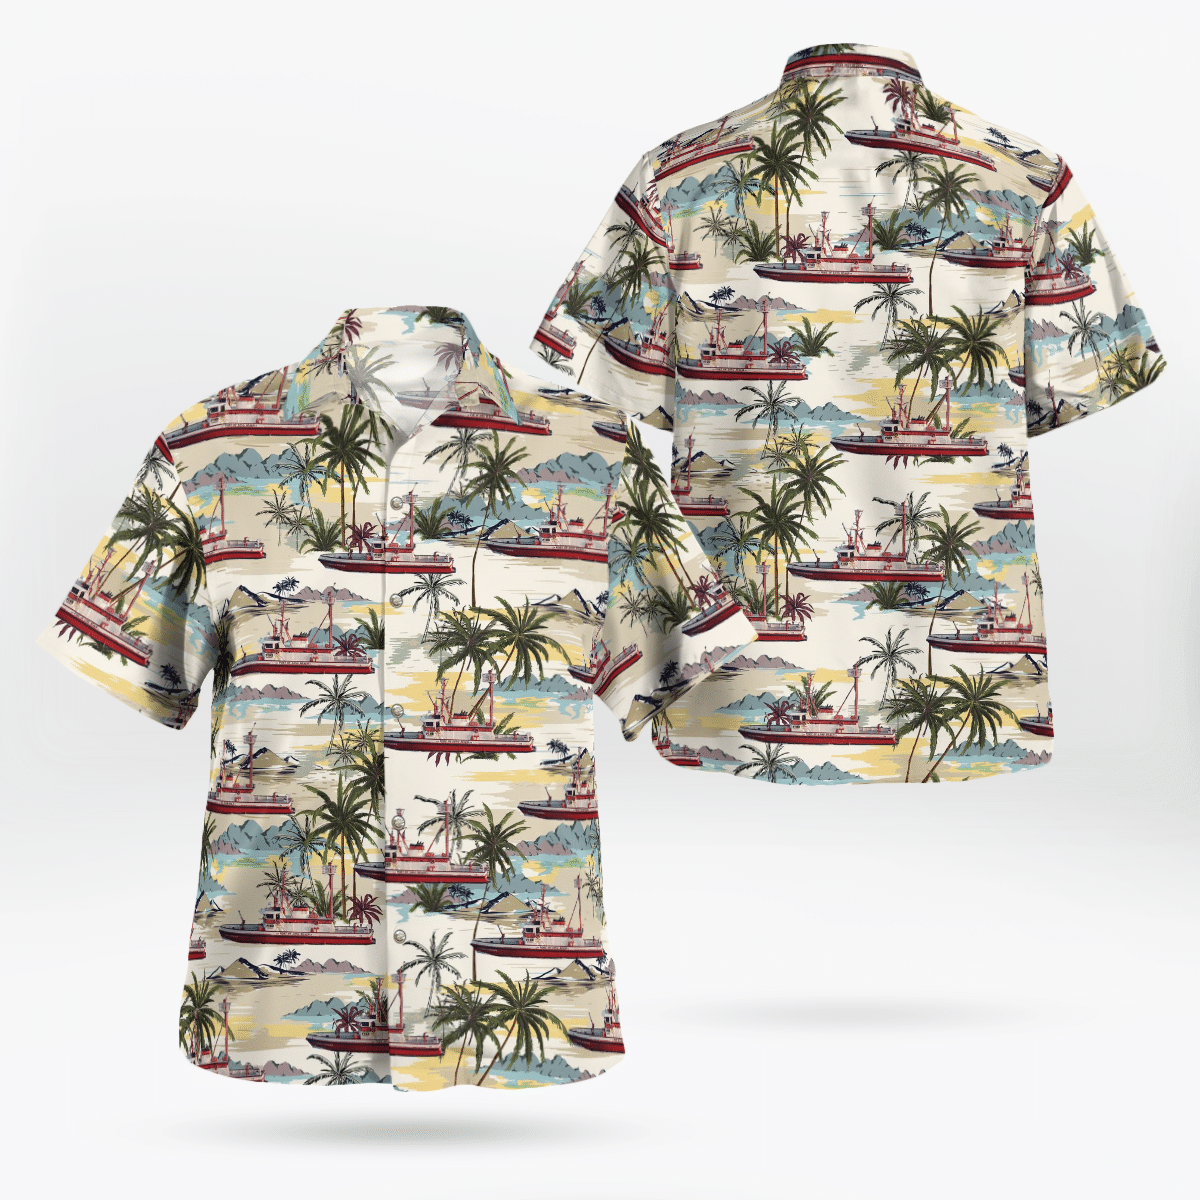 If you are in need of a new summertime look, pick up this Hawaiian shirt 186